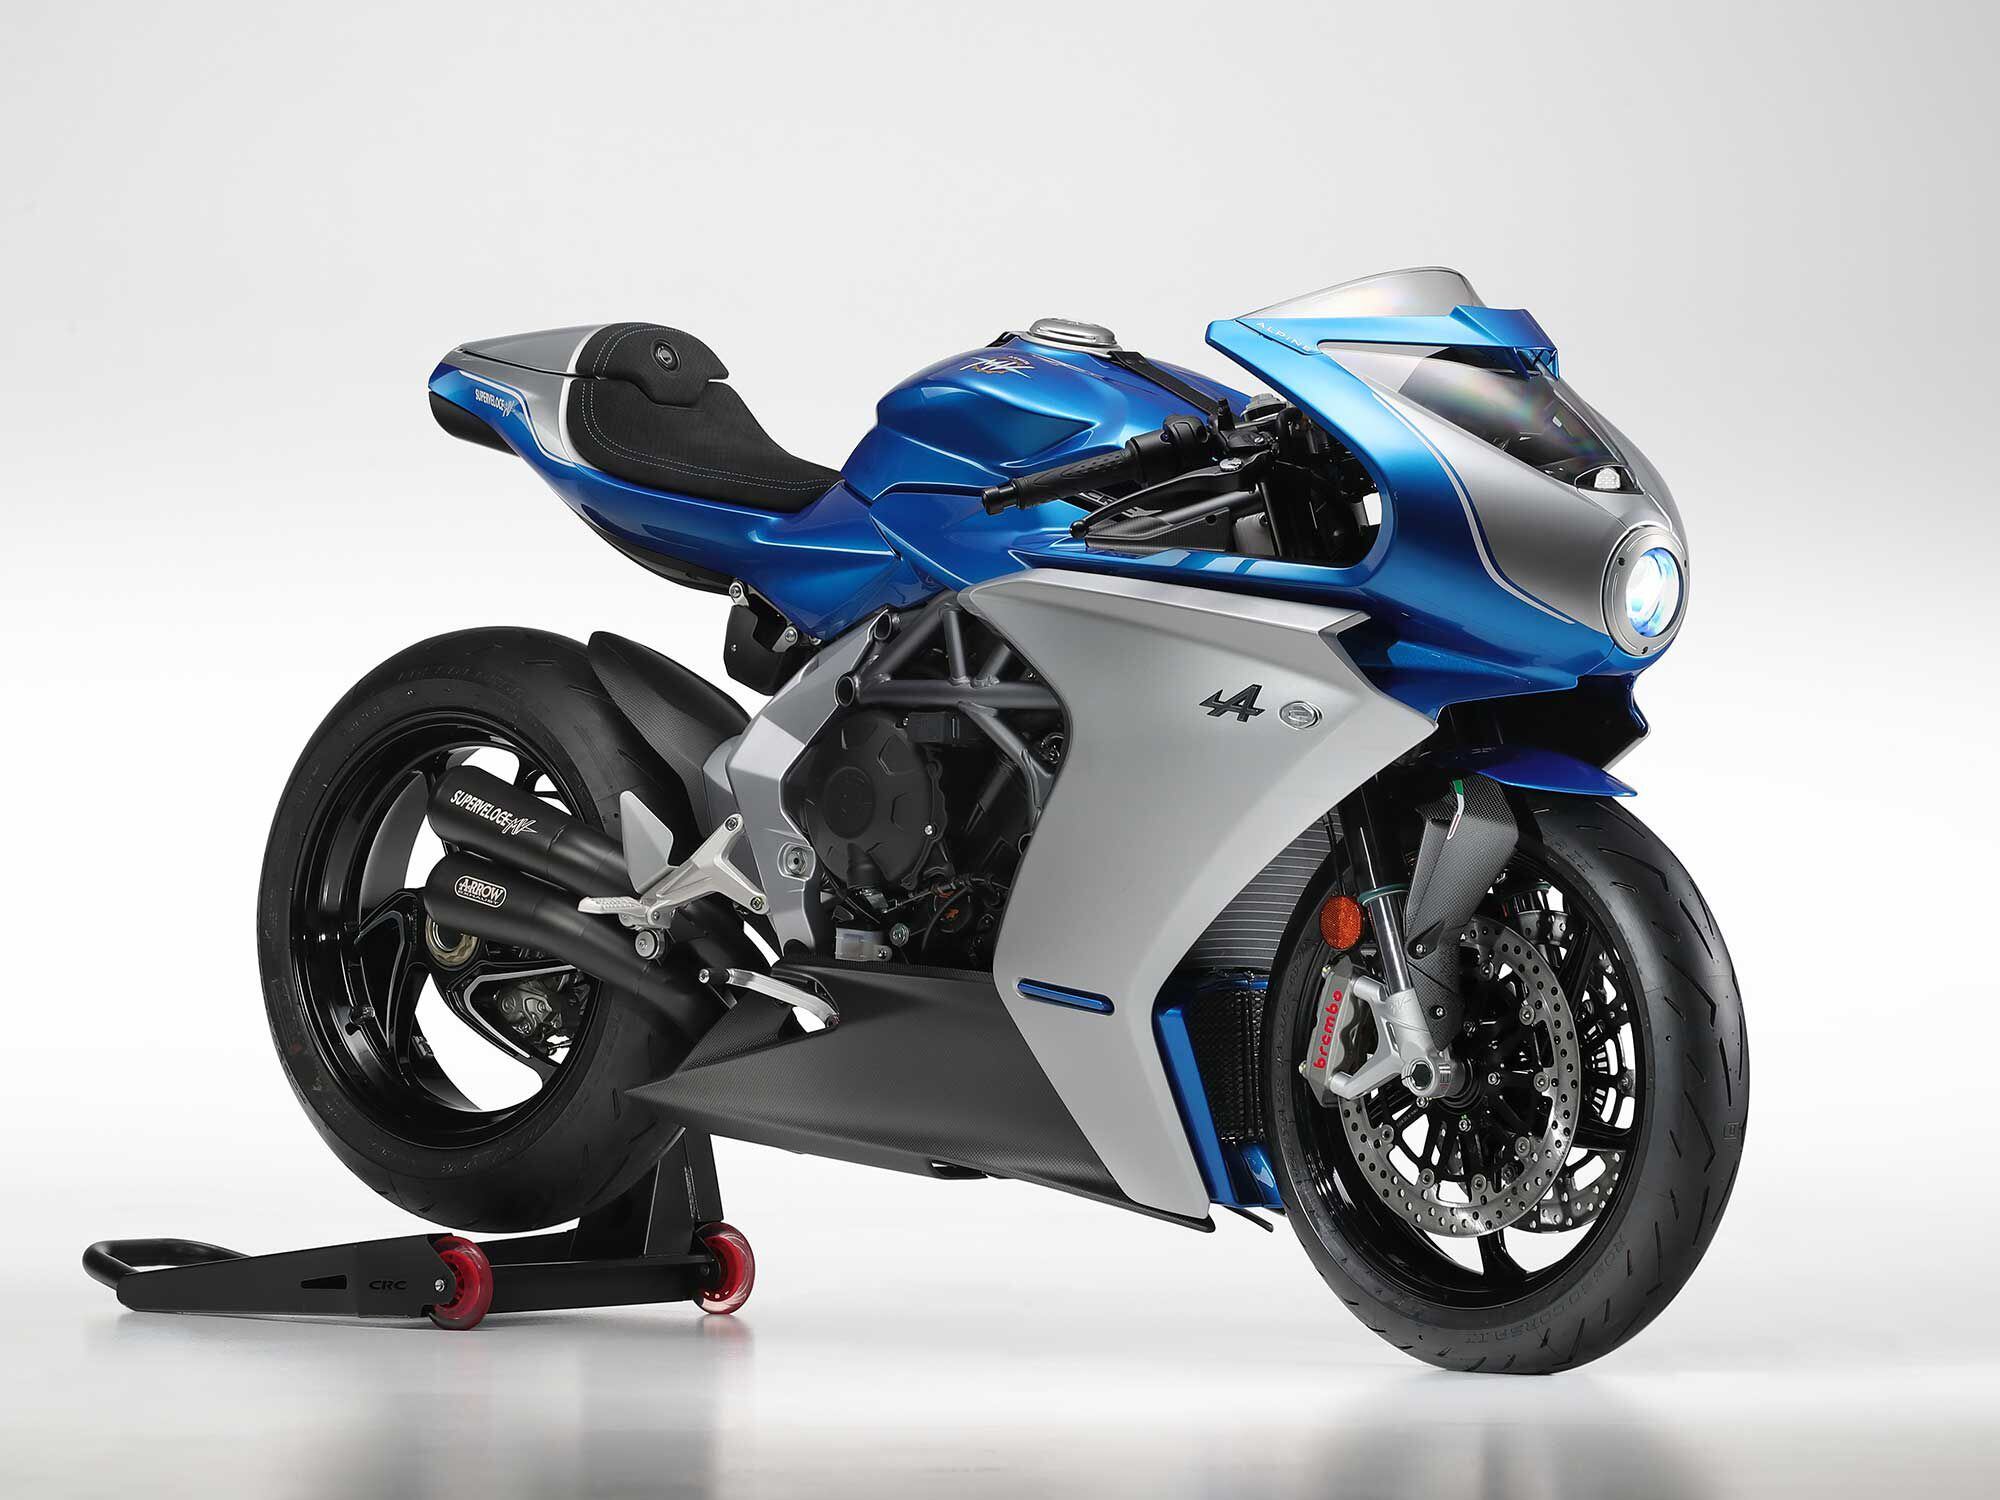 At 36,300 euros on the price tag here’s MV Agusta’s latest limited-edition motorcycle, the Superveloce Alpine.